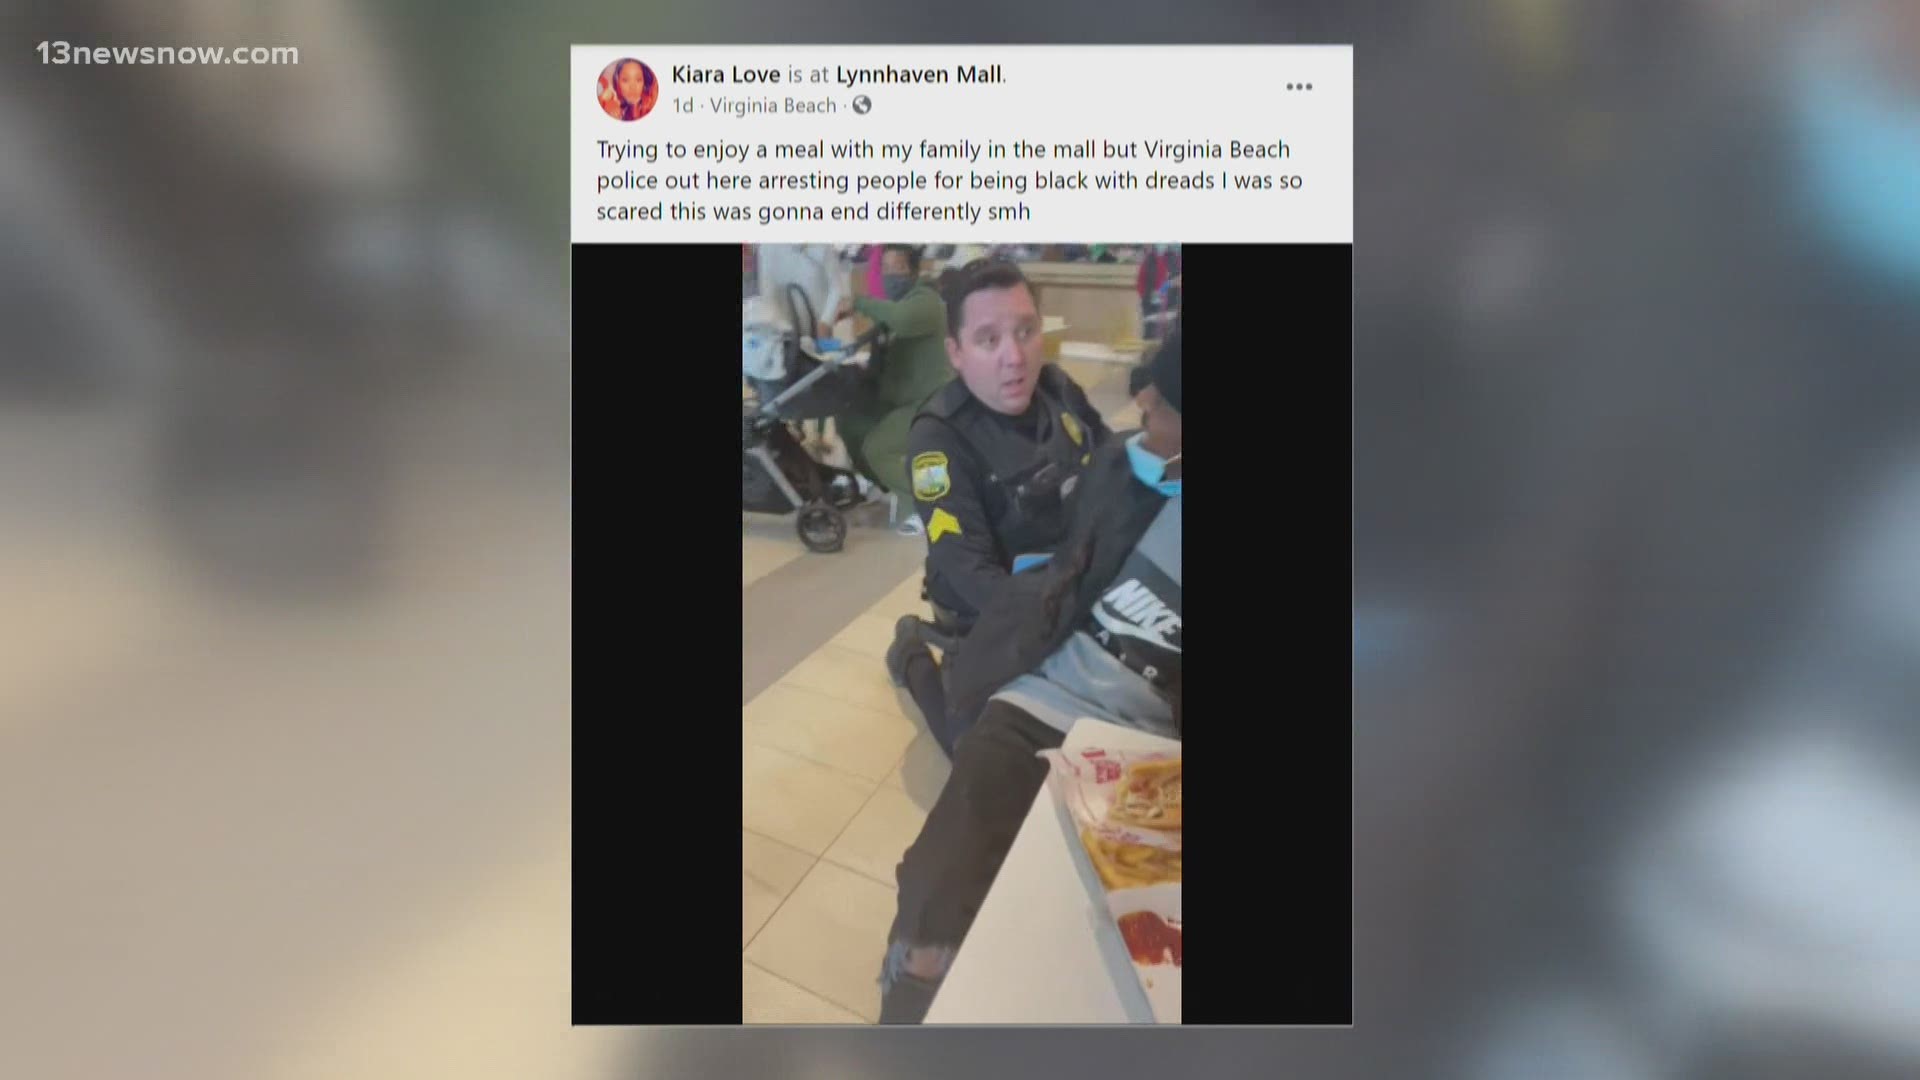 Virginia Beach Police said an officer wrongly handcuffed a man who fit the description of a reported offender and are working to correct this incident.